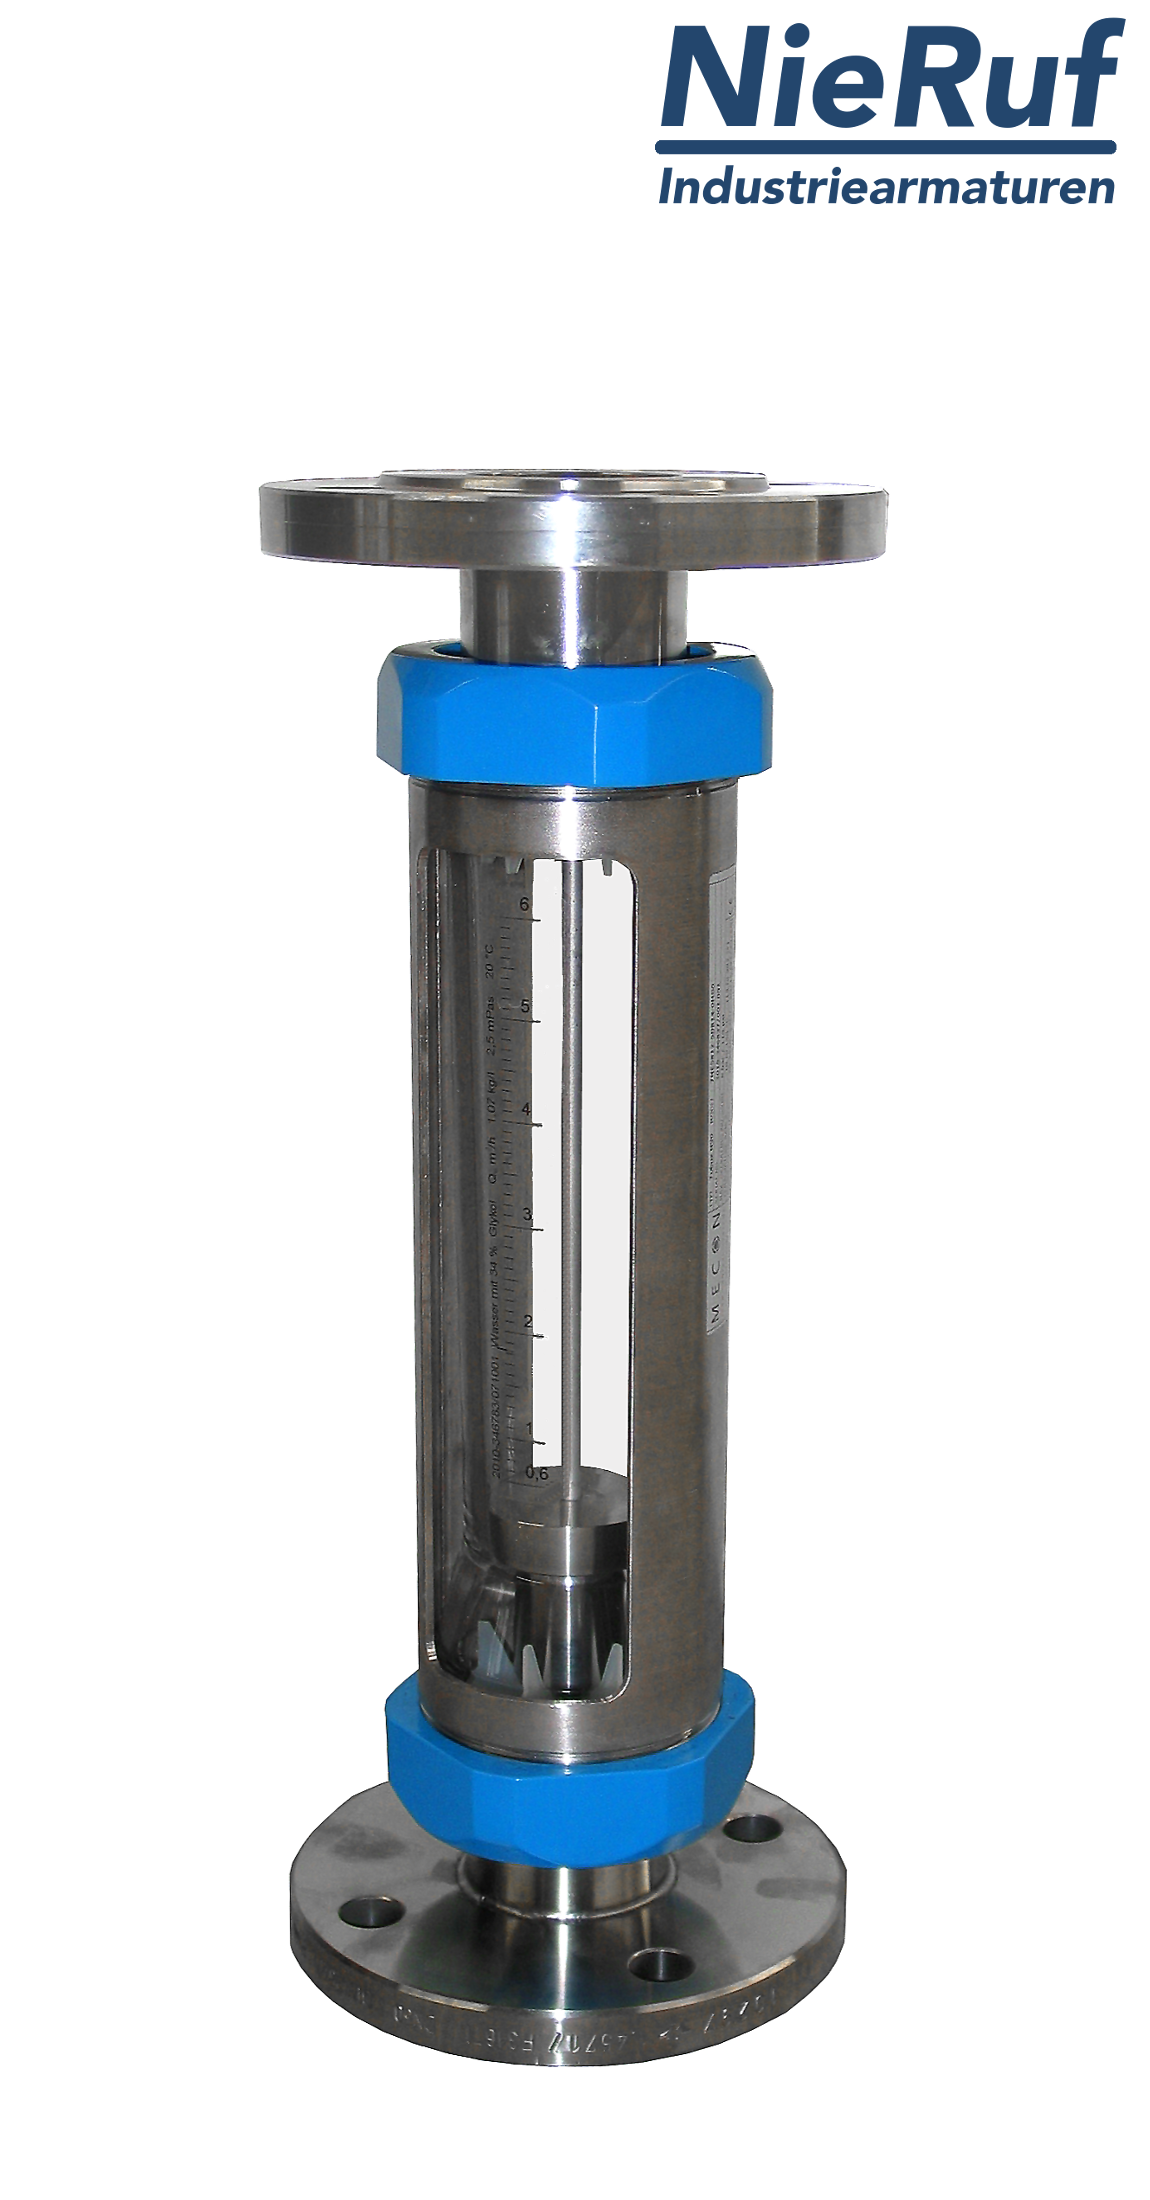 Variable area flowmeter stainless steel + borosilicate flange DN25 8.0 - 80.0 l/h water FKM